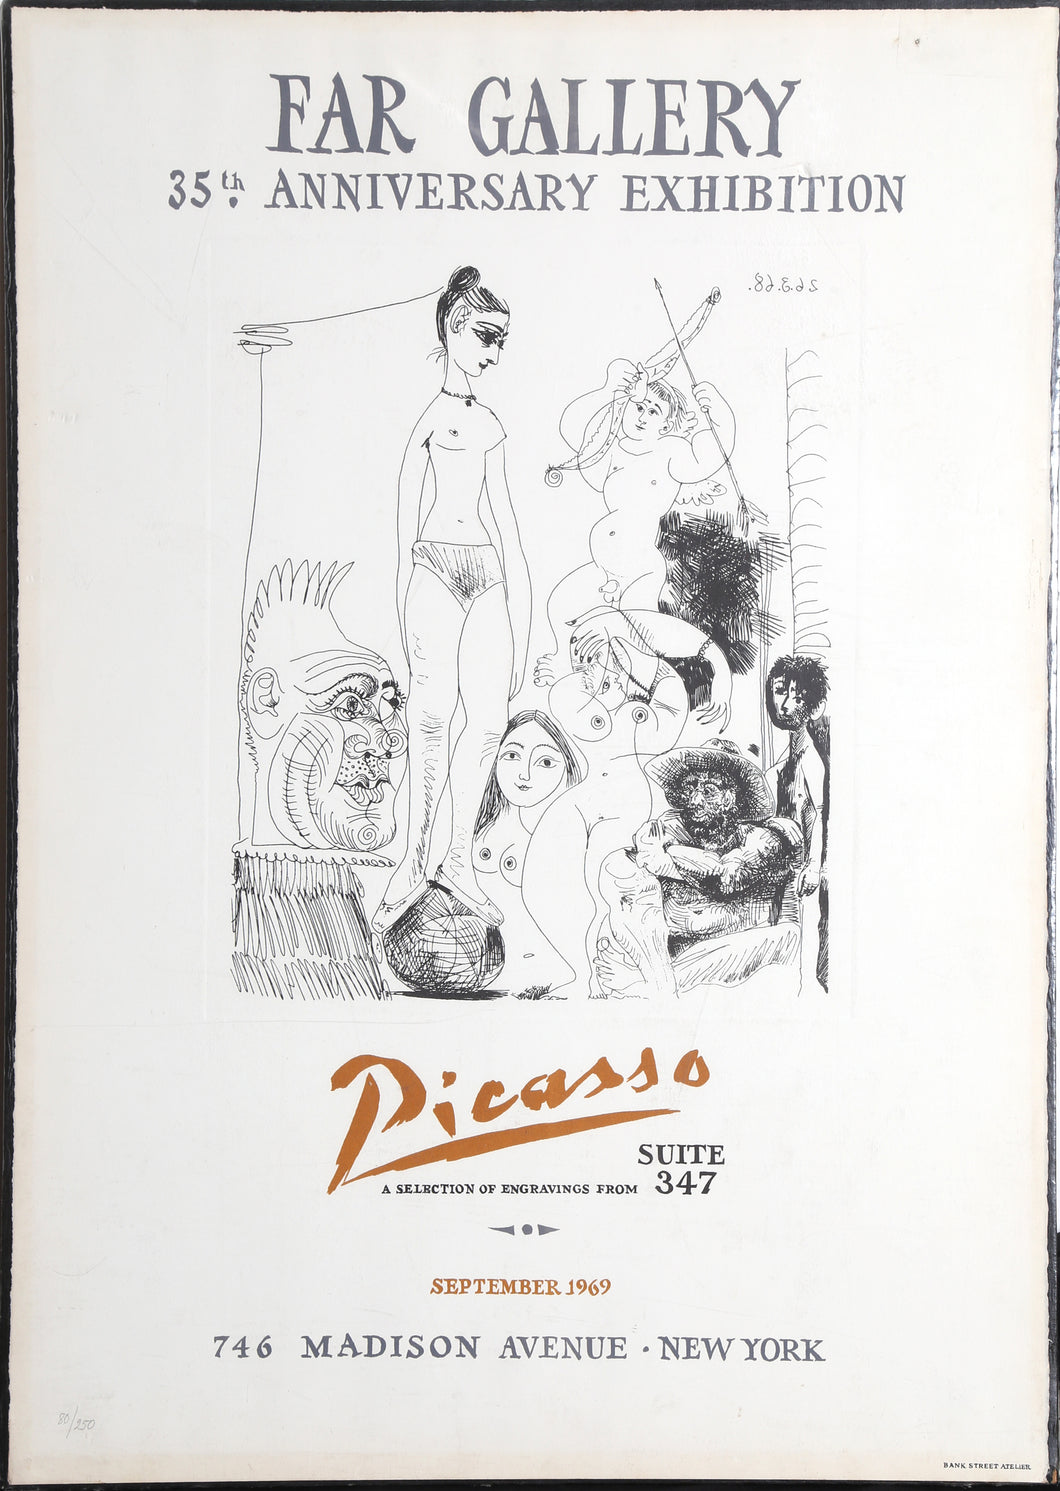 Pablo Picasso, Far Gallery 35th Anniversary Edition - Suite 347 New York, Poster